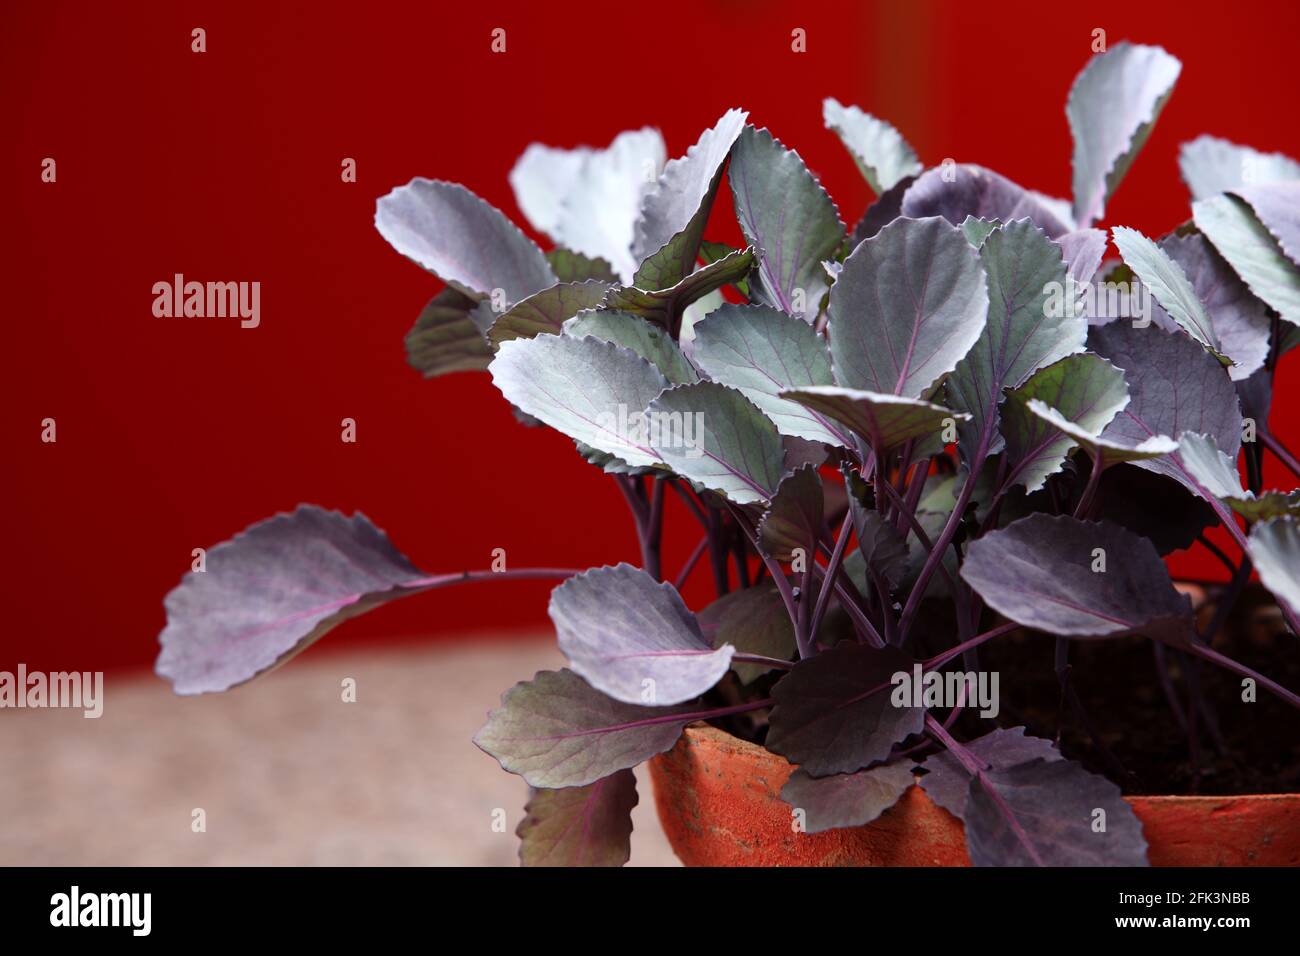 Seedlings of Red cabbage (Brassica oleracea var. capitata f. rubra) is a sort of cabbage, also known as purple cabbage, red kraut, or blue kraut in ki Stock Photo